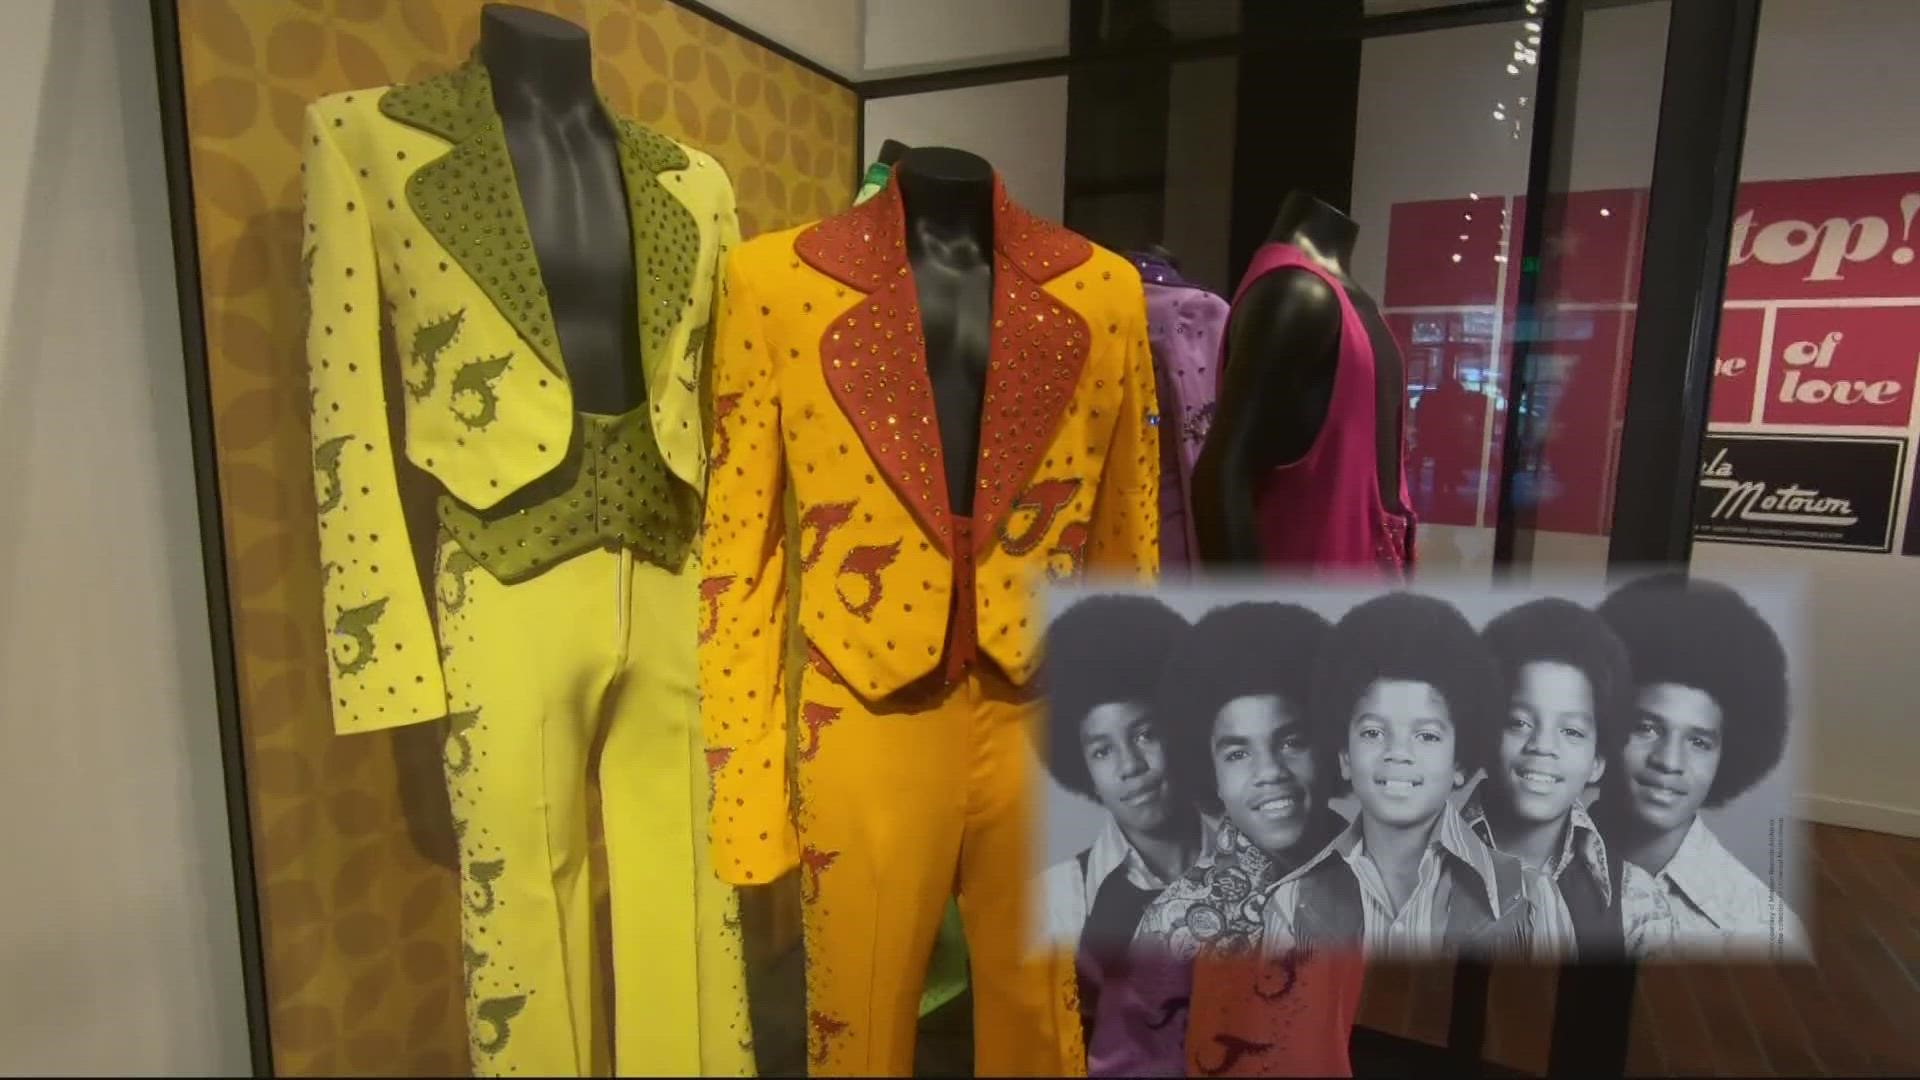 The Oregon Historical Society has a new exhibit that highlights the contributions and history of soul music. The exhibit runs through March 26, 2023.